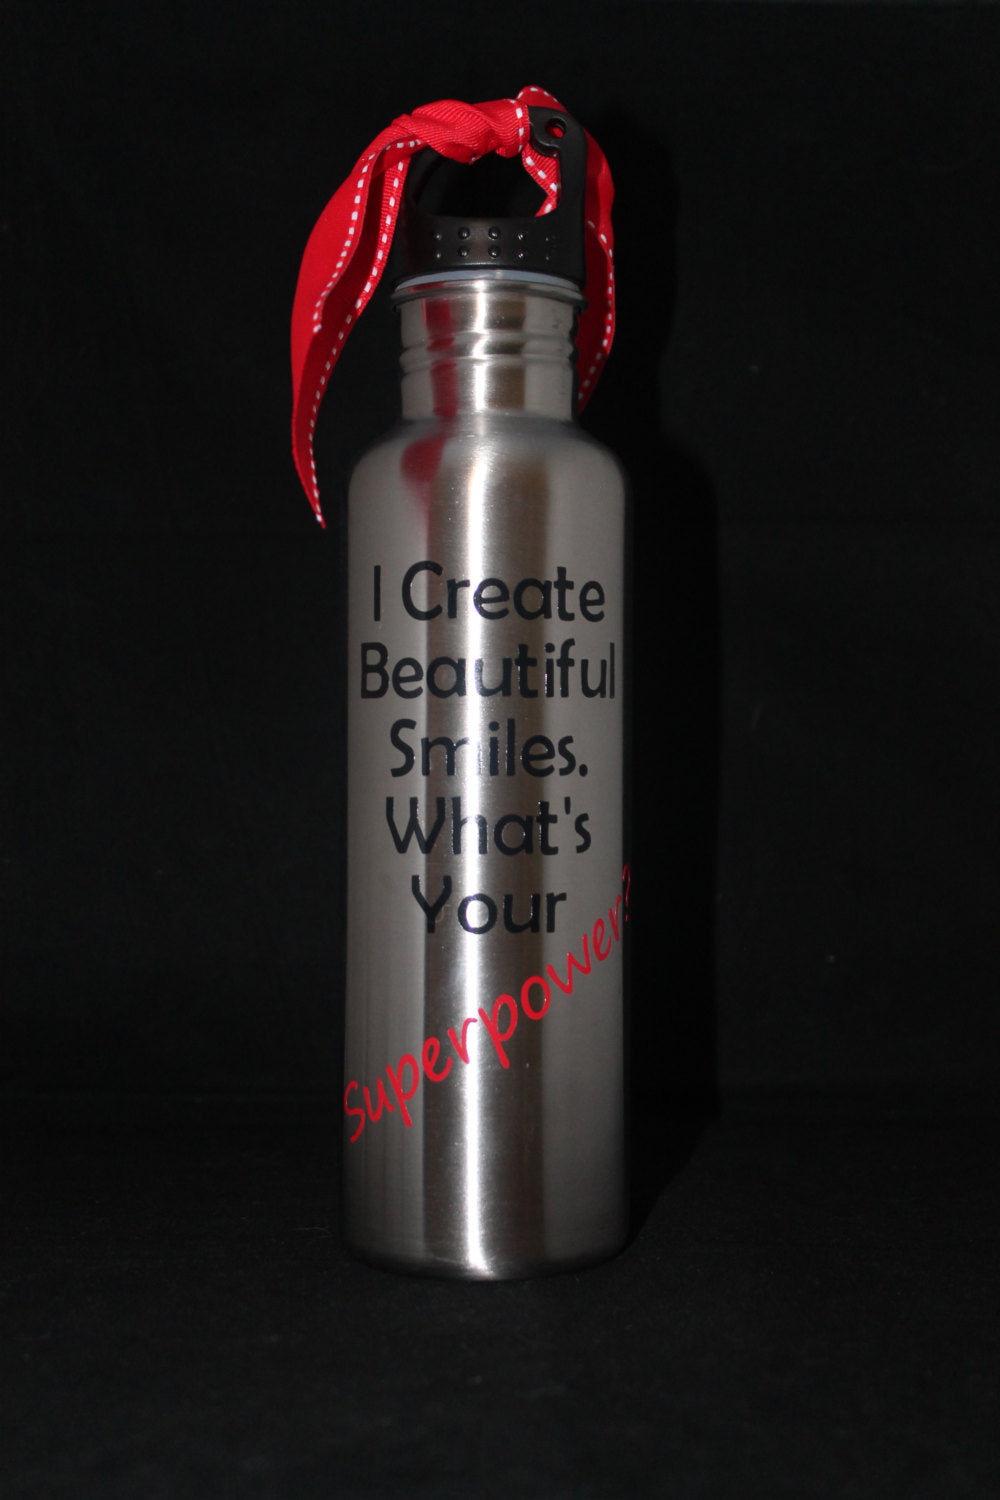 Dentist Appreciation" 25 oz Stainless Steel Water Bottle - Thank You Gift - Christmas - Gift - Birthday - Staff